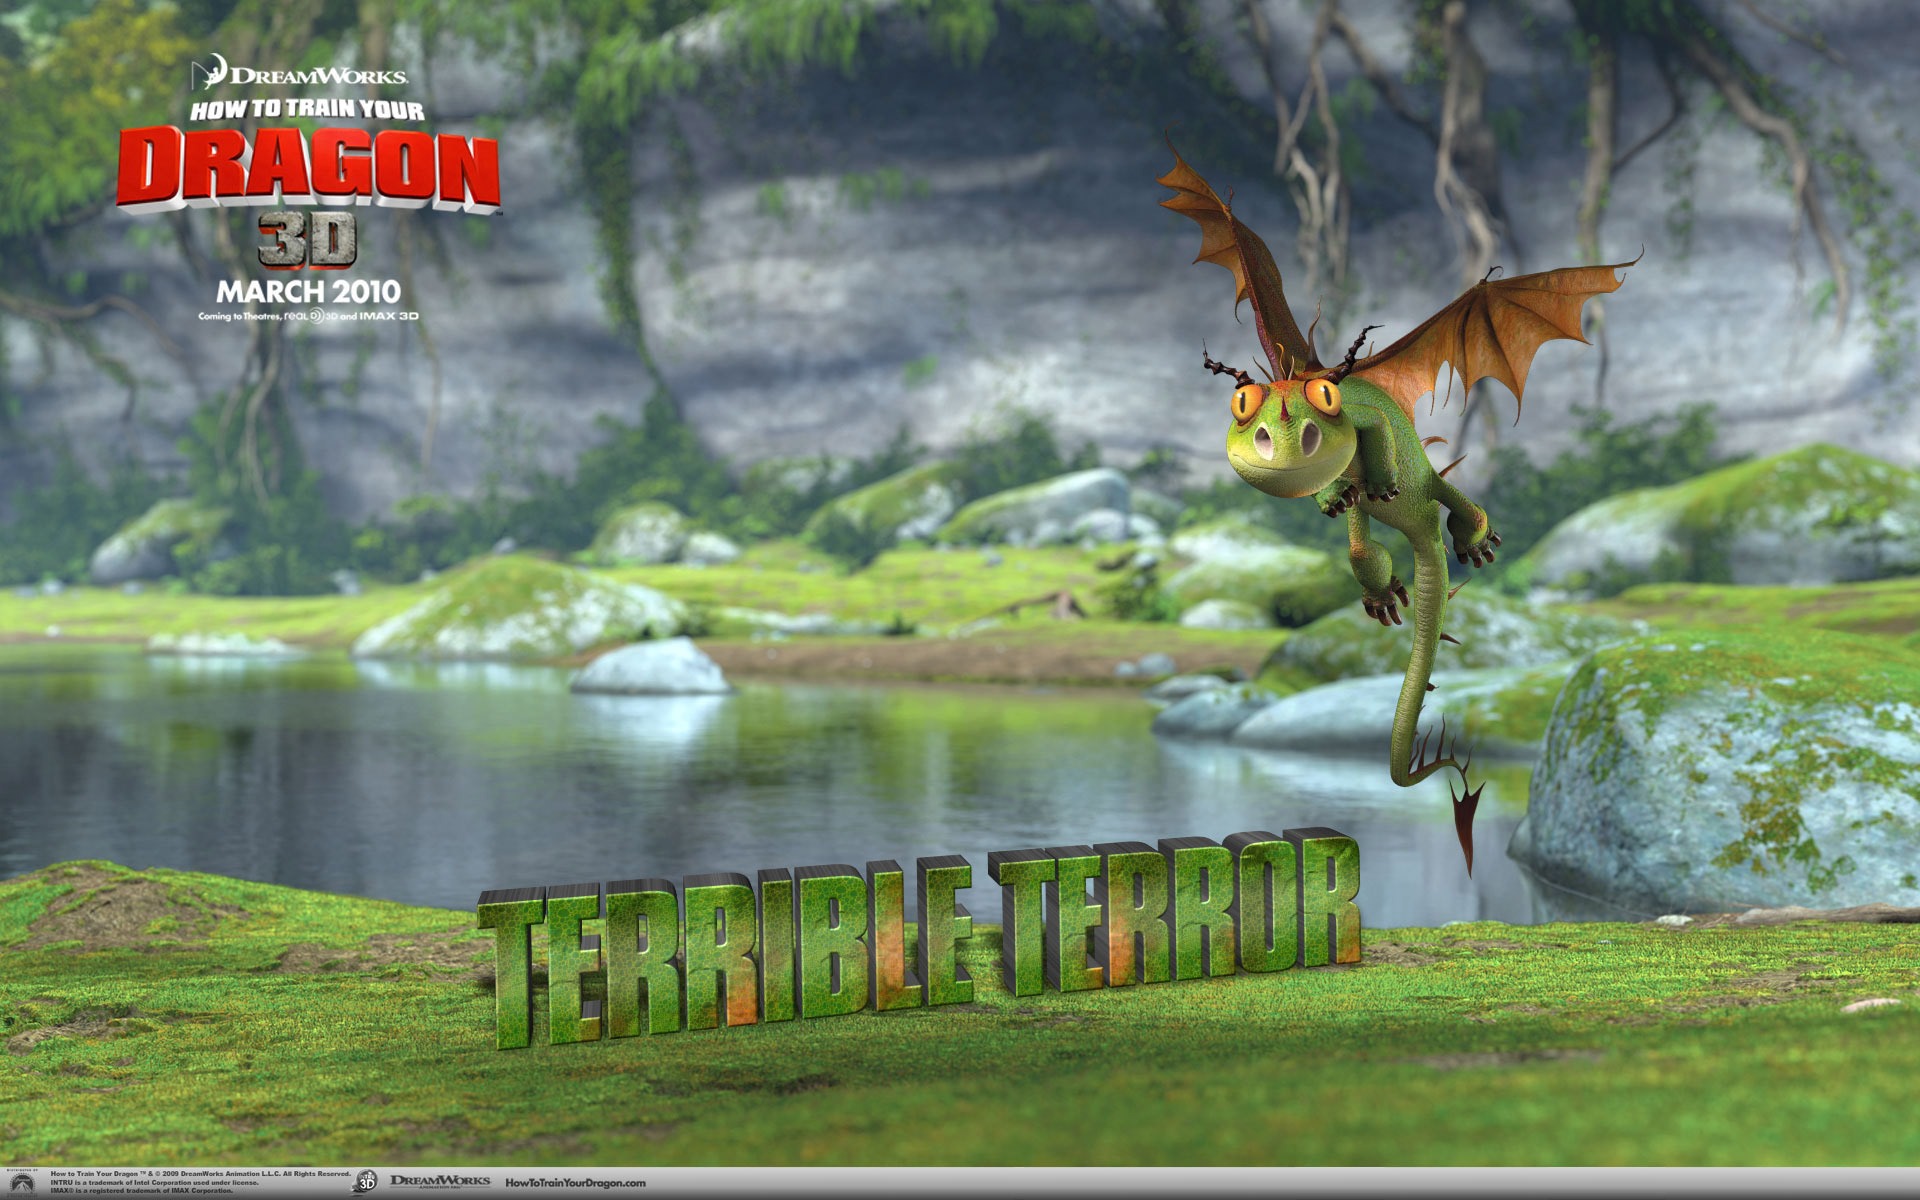 How To Train Your Dragon Hd Wallpaper - All Dragons In How To Train Your Dragon Model 3d - HD Wallpaper 